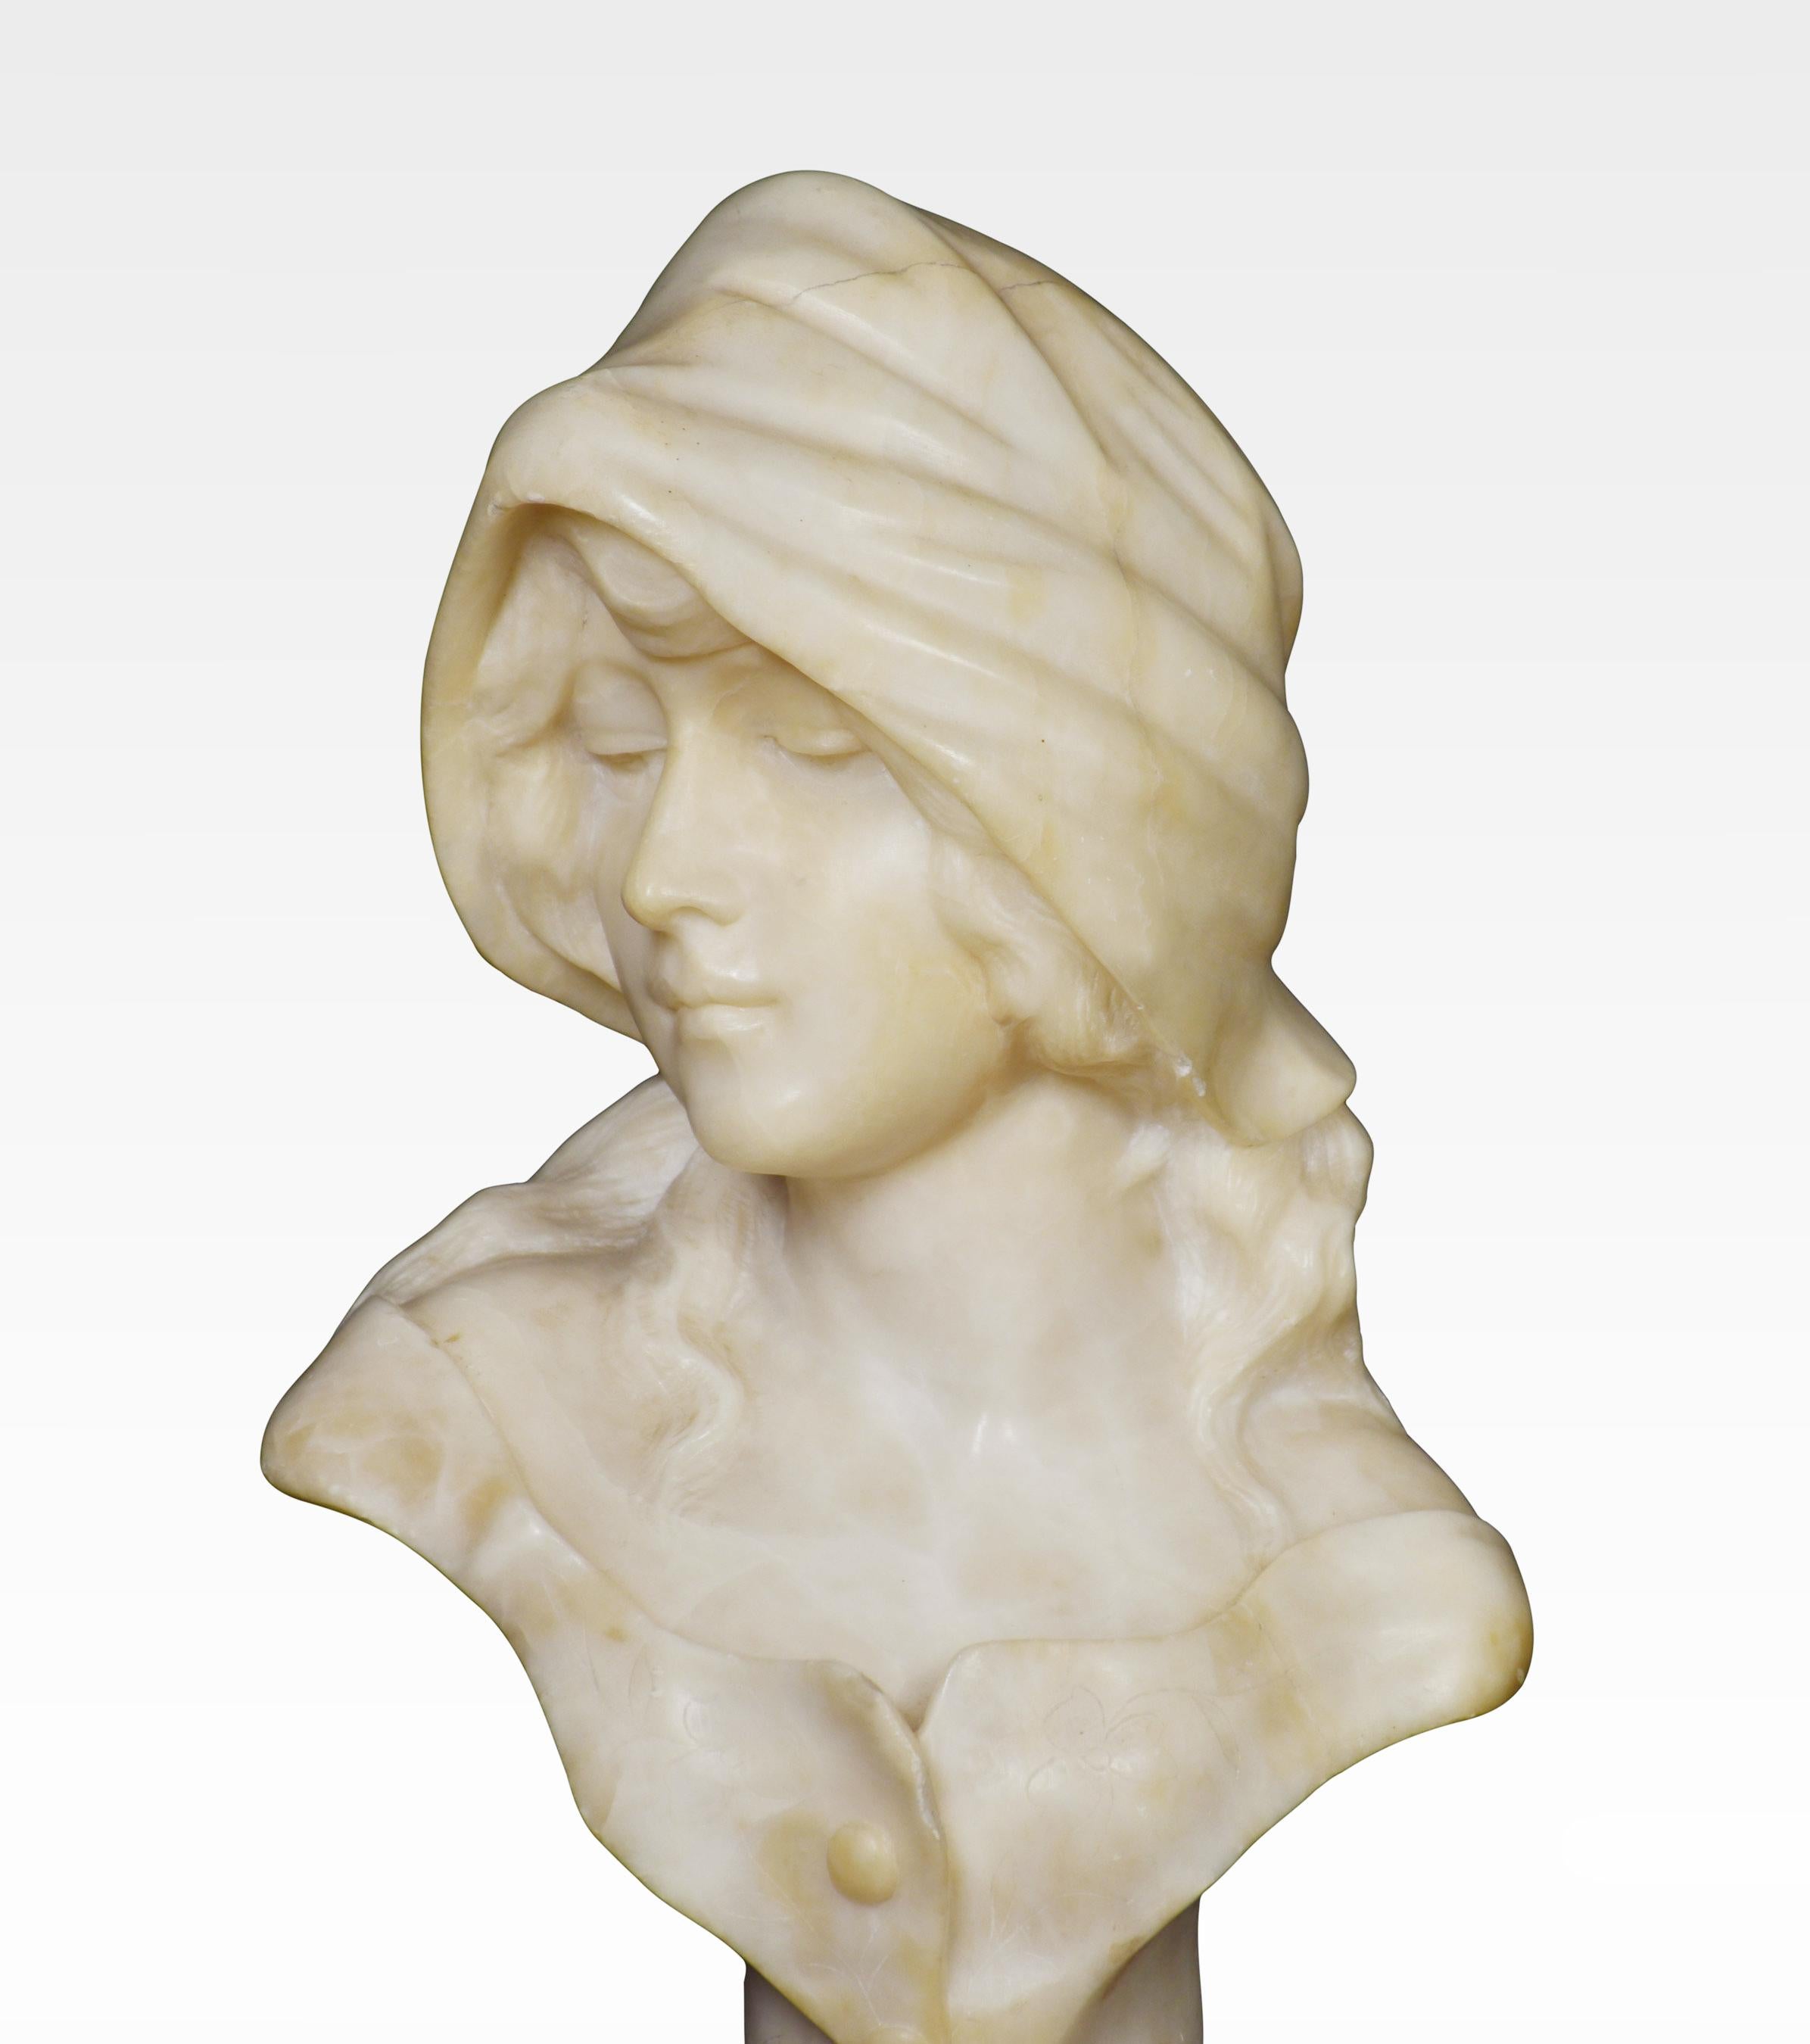 An Art Deco Alabaster bust of a hooded female on spiral base.
Dimensions
Height 15 inches
Width 8 inches
Depth 6 inches.